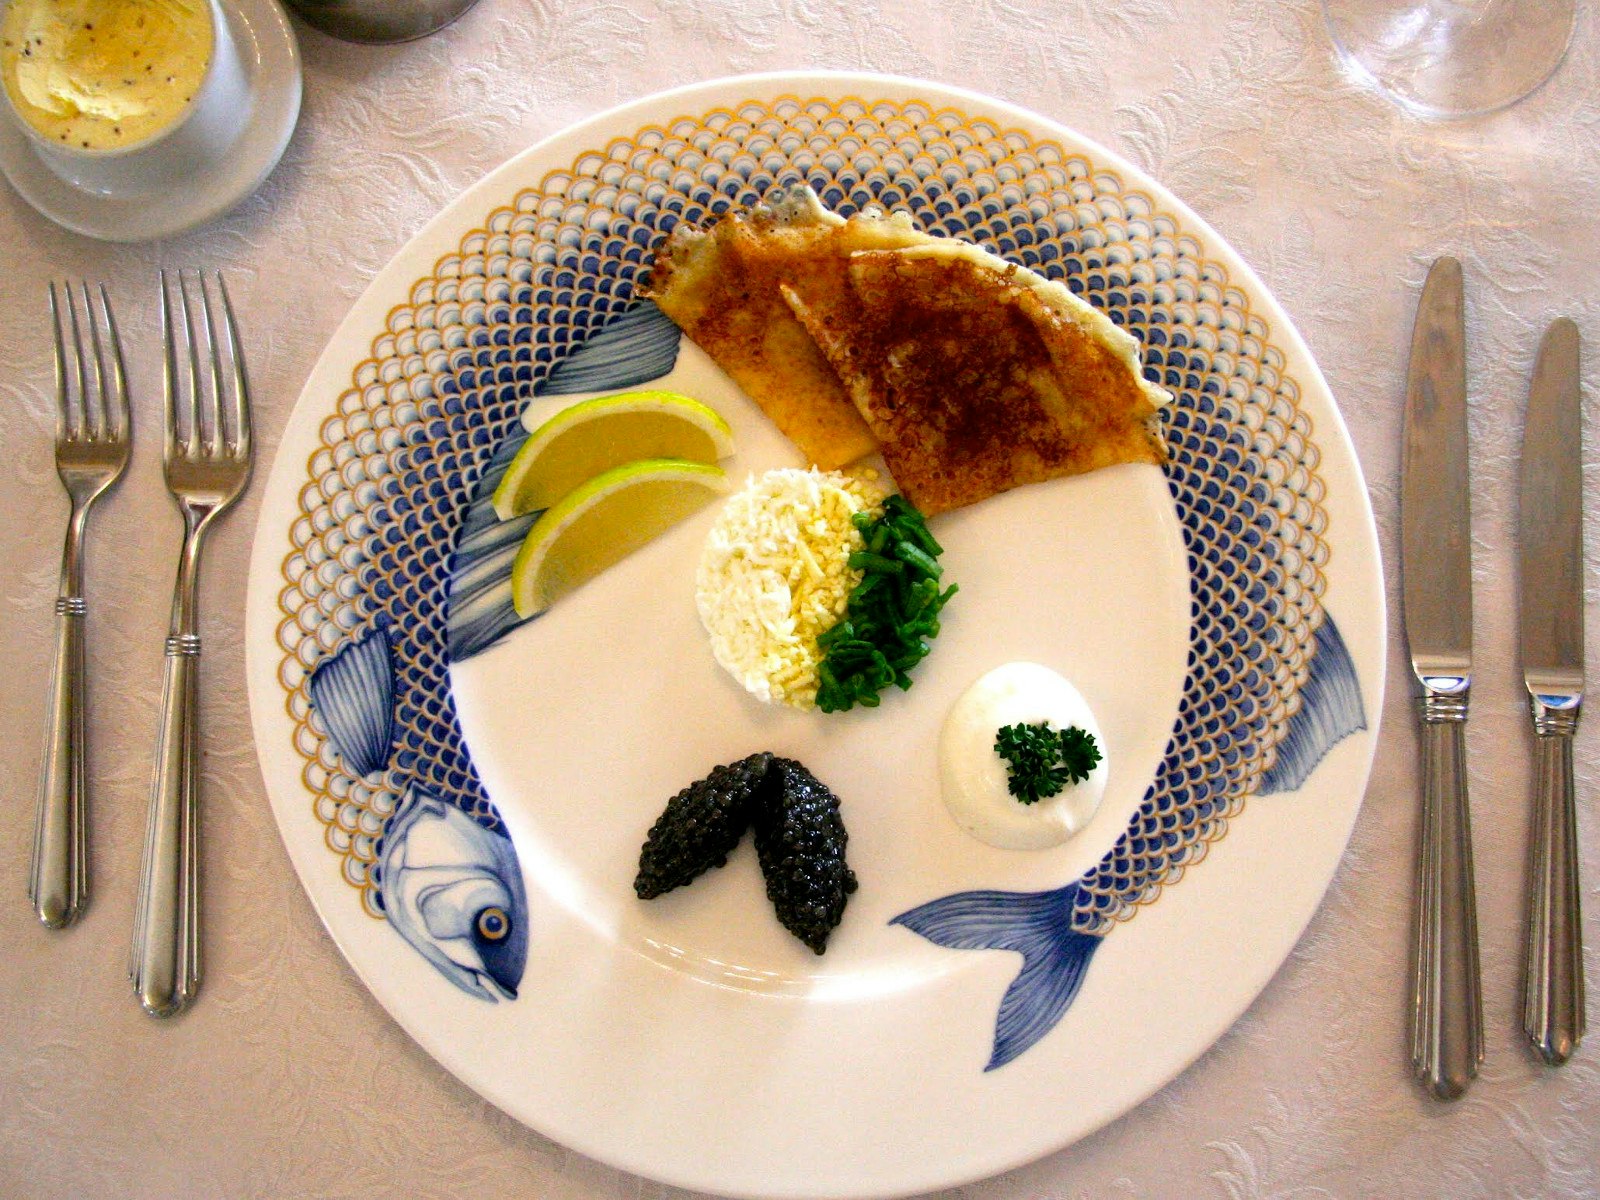 Bliny (pancakes) are typically served with toppings that include varieties of caviar © Simon Richmond / Lonely Planet